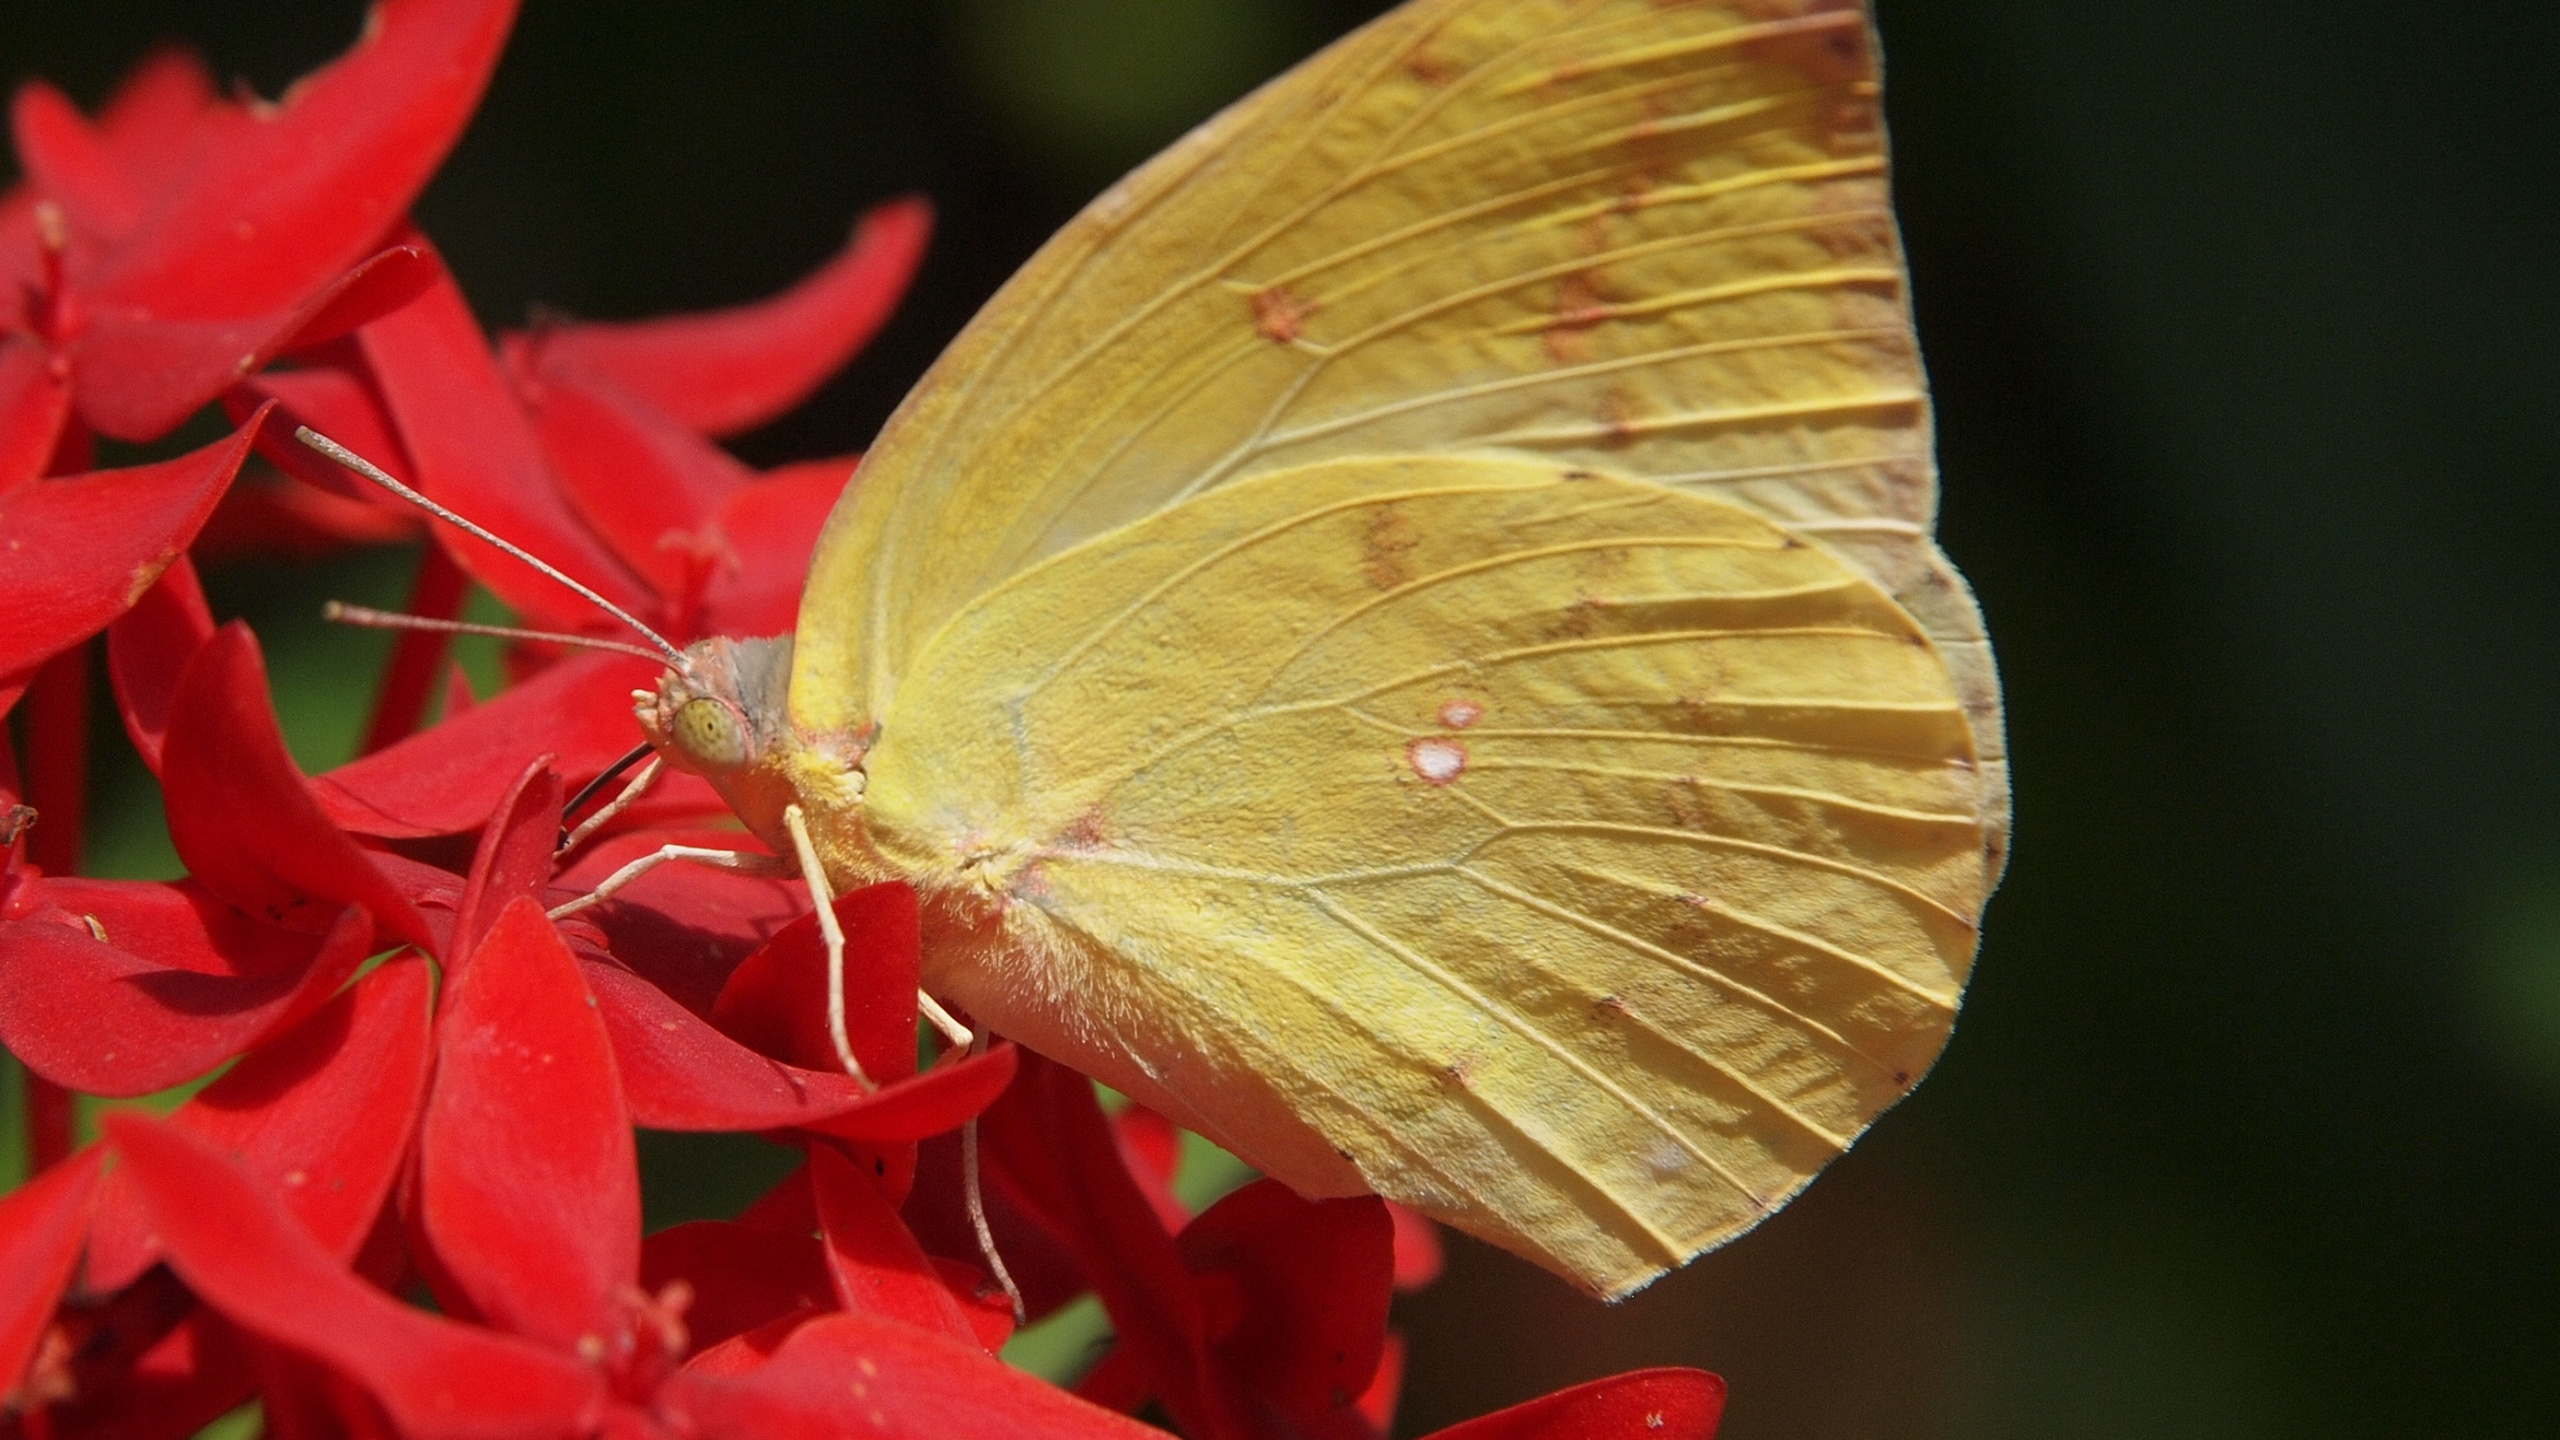 Yellow Butterfly Perched on Red Flower in Close up Photography During Daytime. Wallpaper in 2560x1440 Resolution